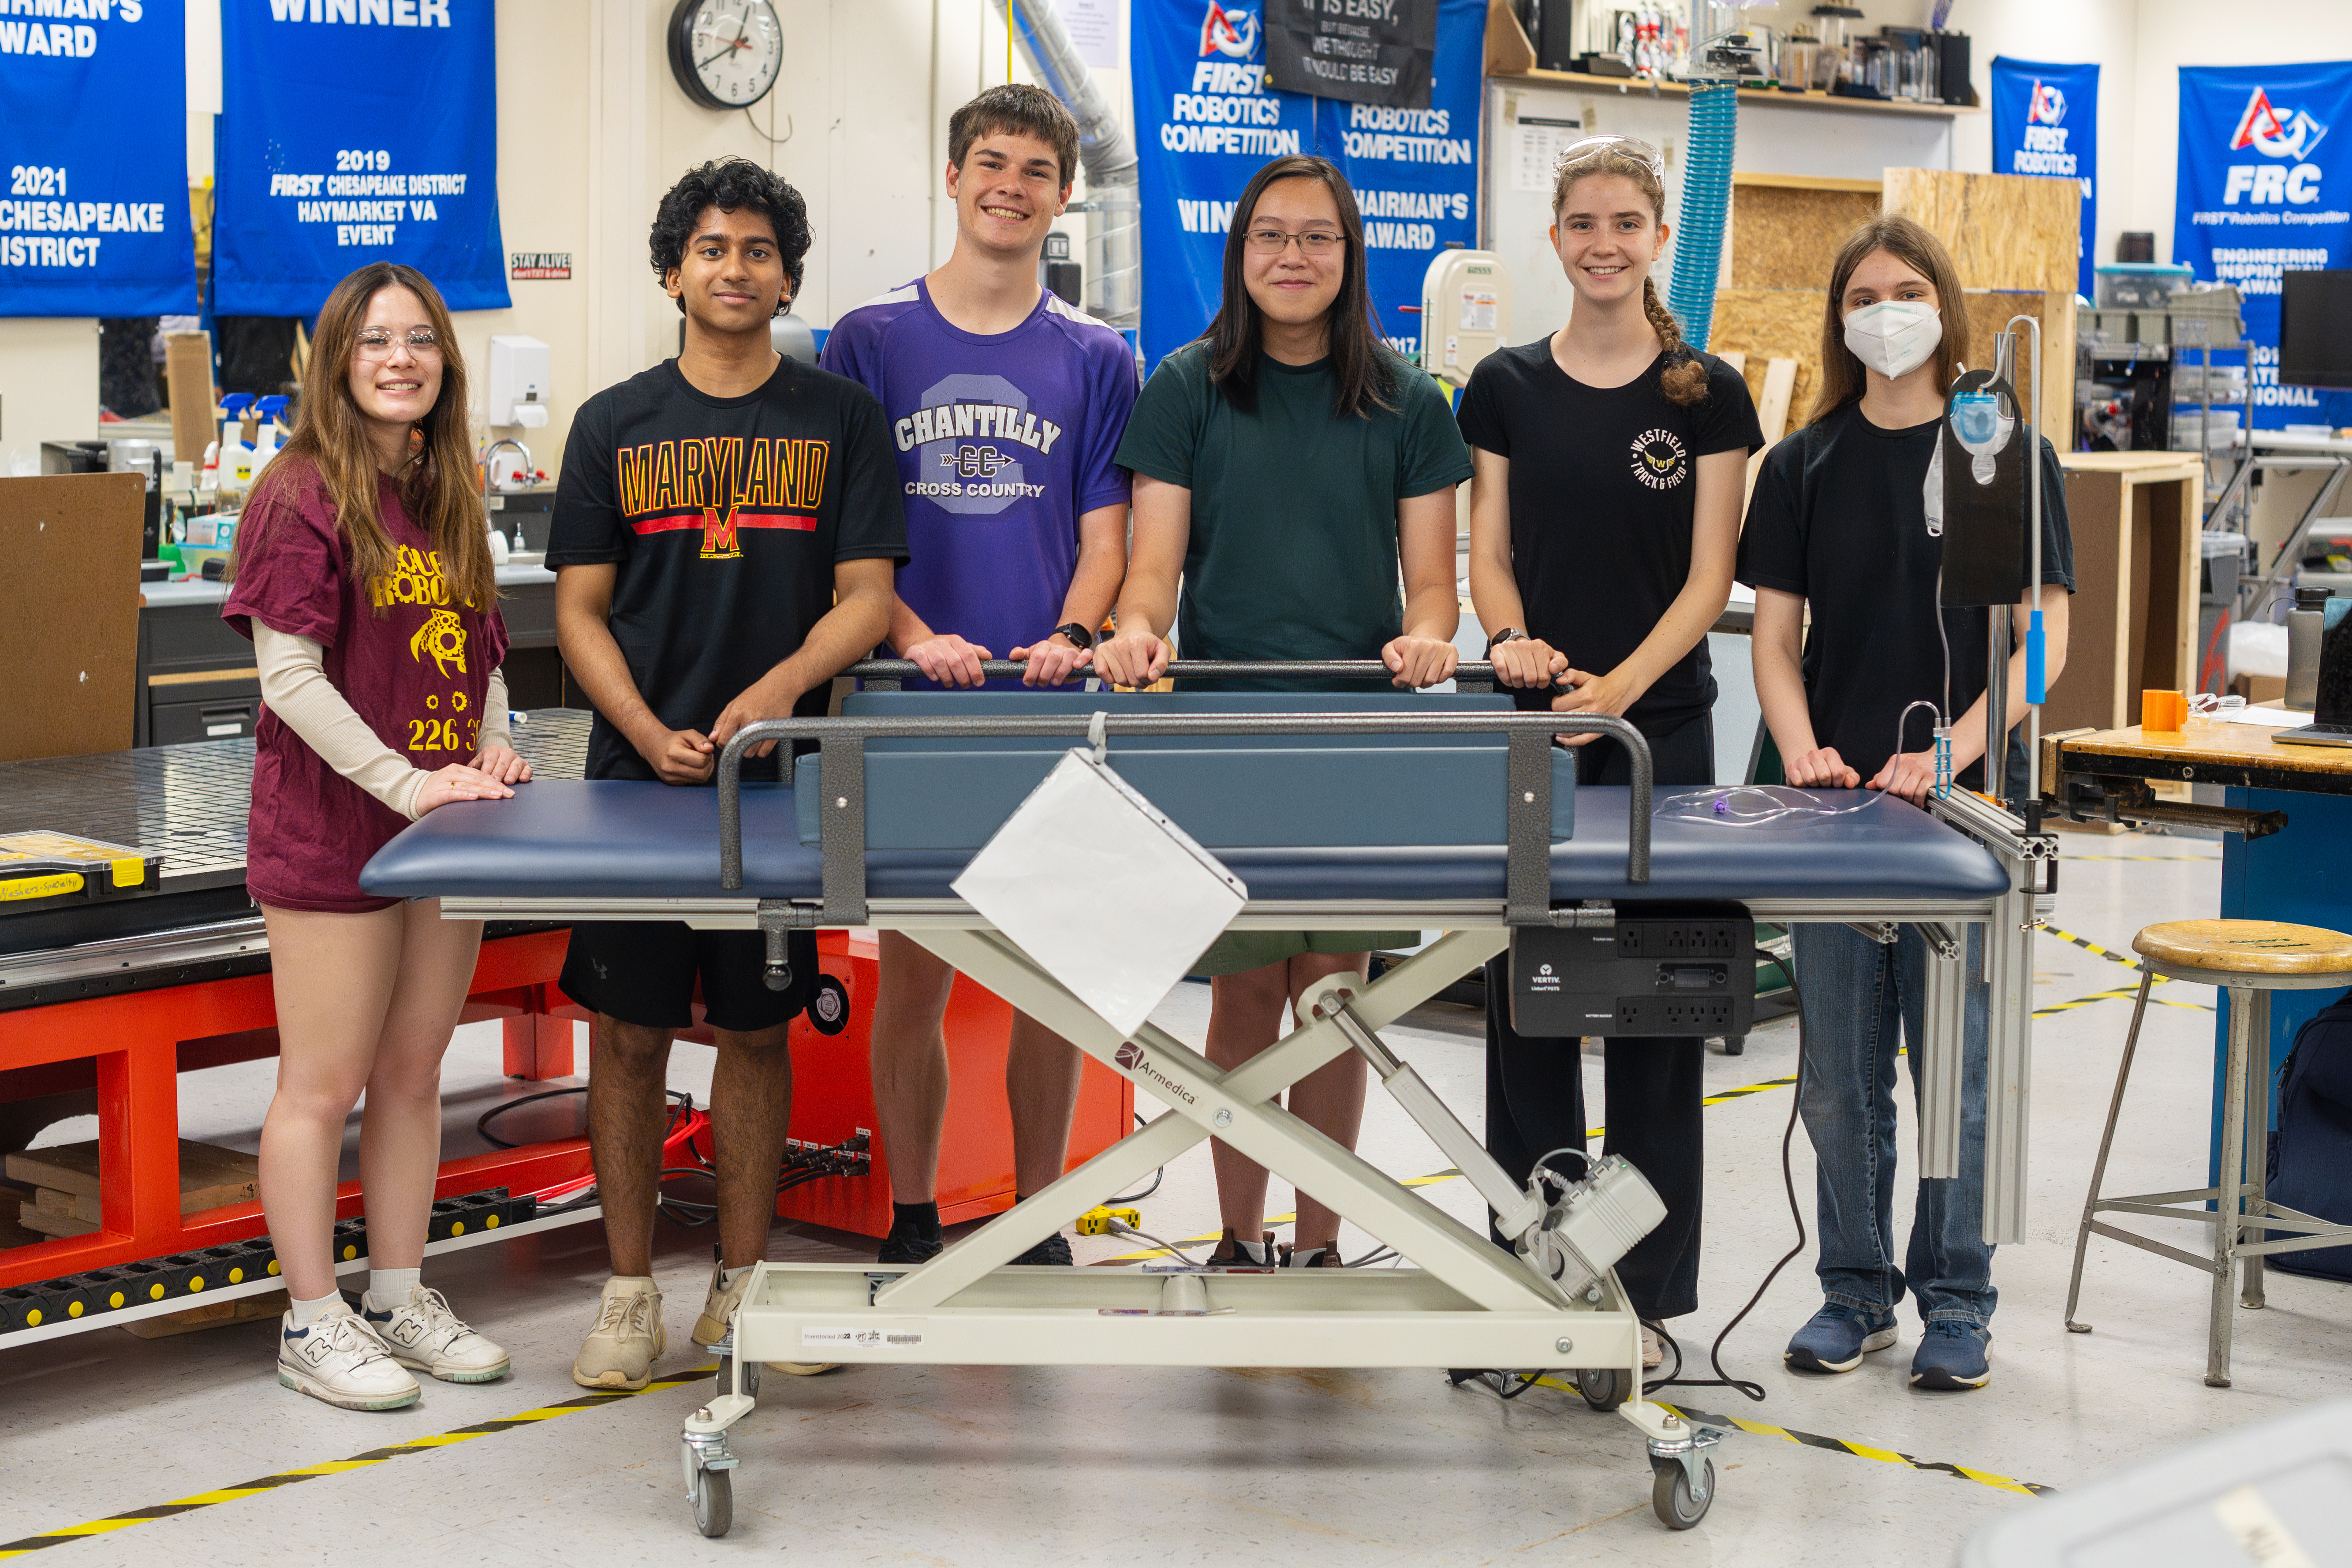 The six students on the Engineering team smile as they stand behind the bed.